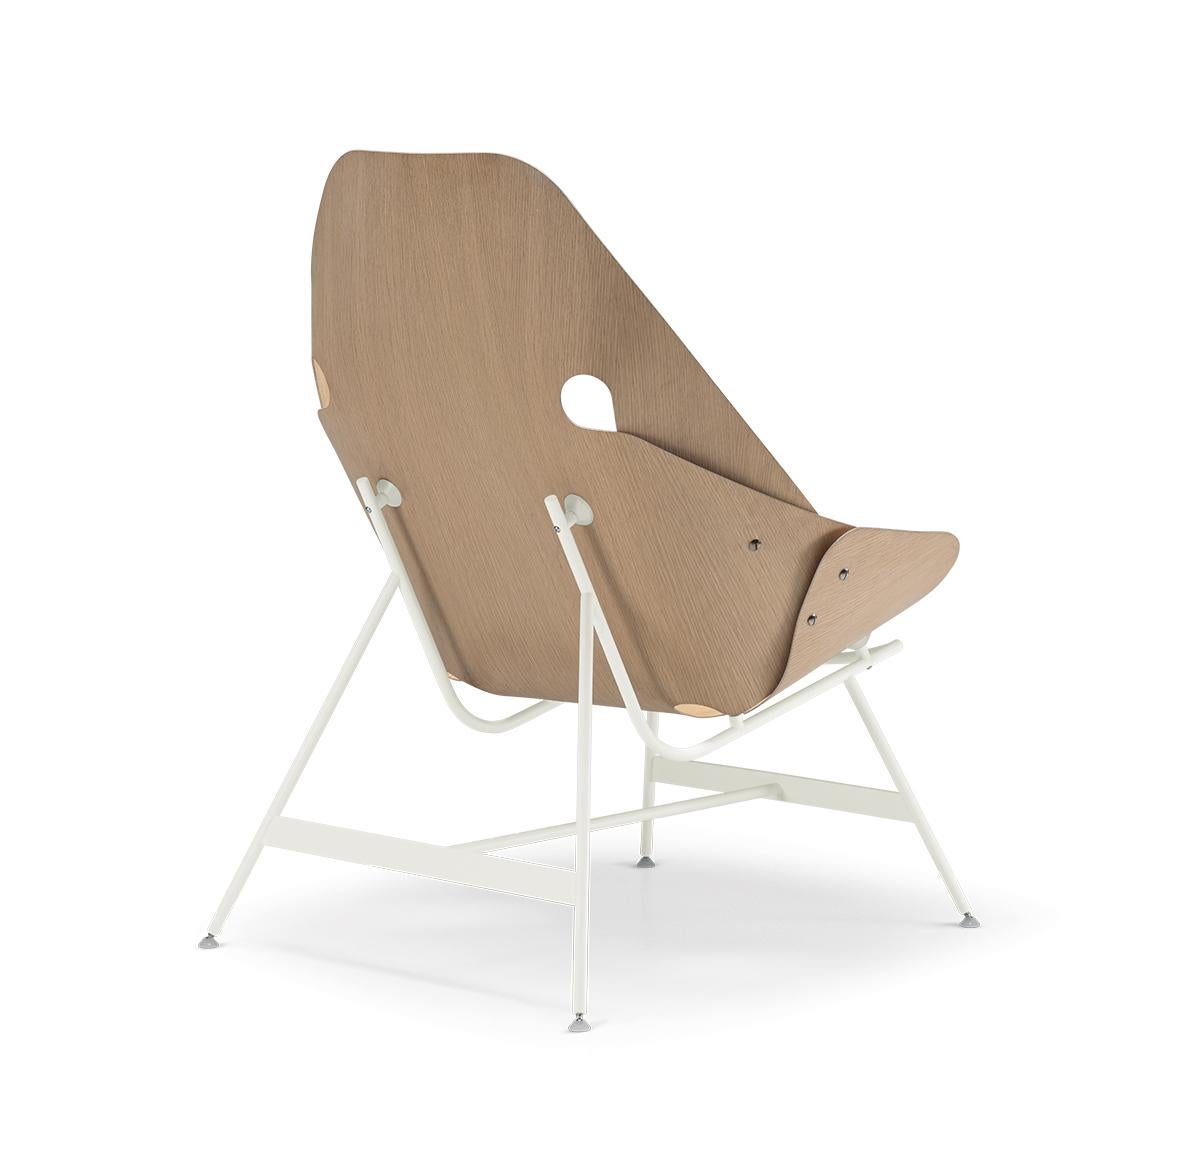 Alias 53A Time Armchair with Natural Oak and White Lacquered Steel Frame by Alfredo Häberli

Armchair with structure in lacquered steel.Shell in laminated glass fiber and oak veneered.

Born in Buenos Aires in 1964, he moved to Zurich in 1977,